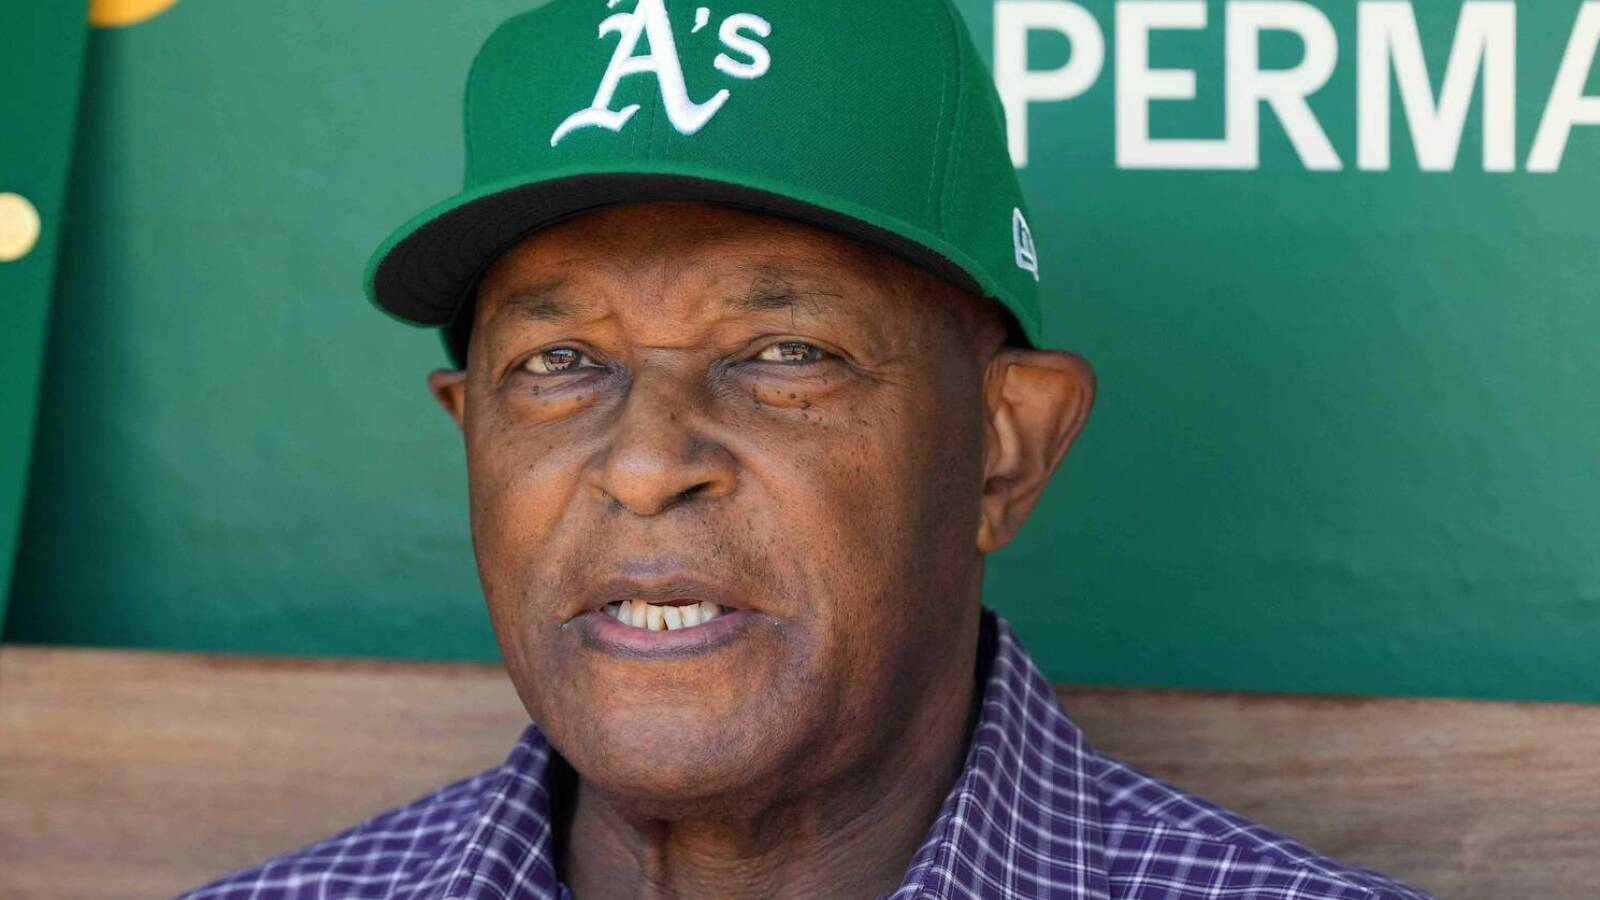 Vida Blue was the last American League player to accomplish this rare feat